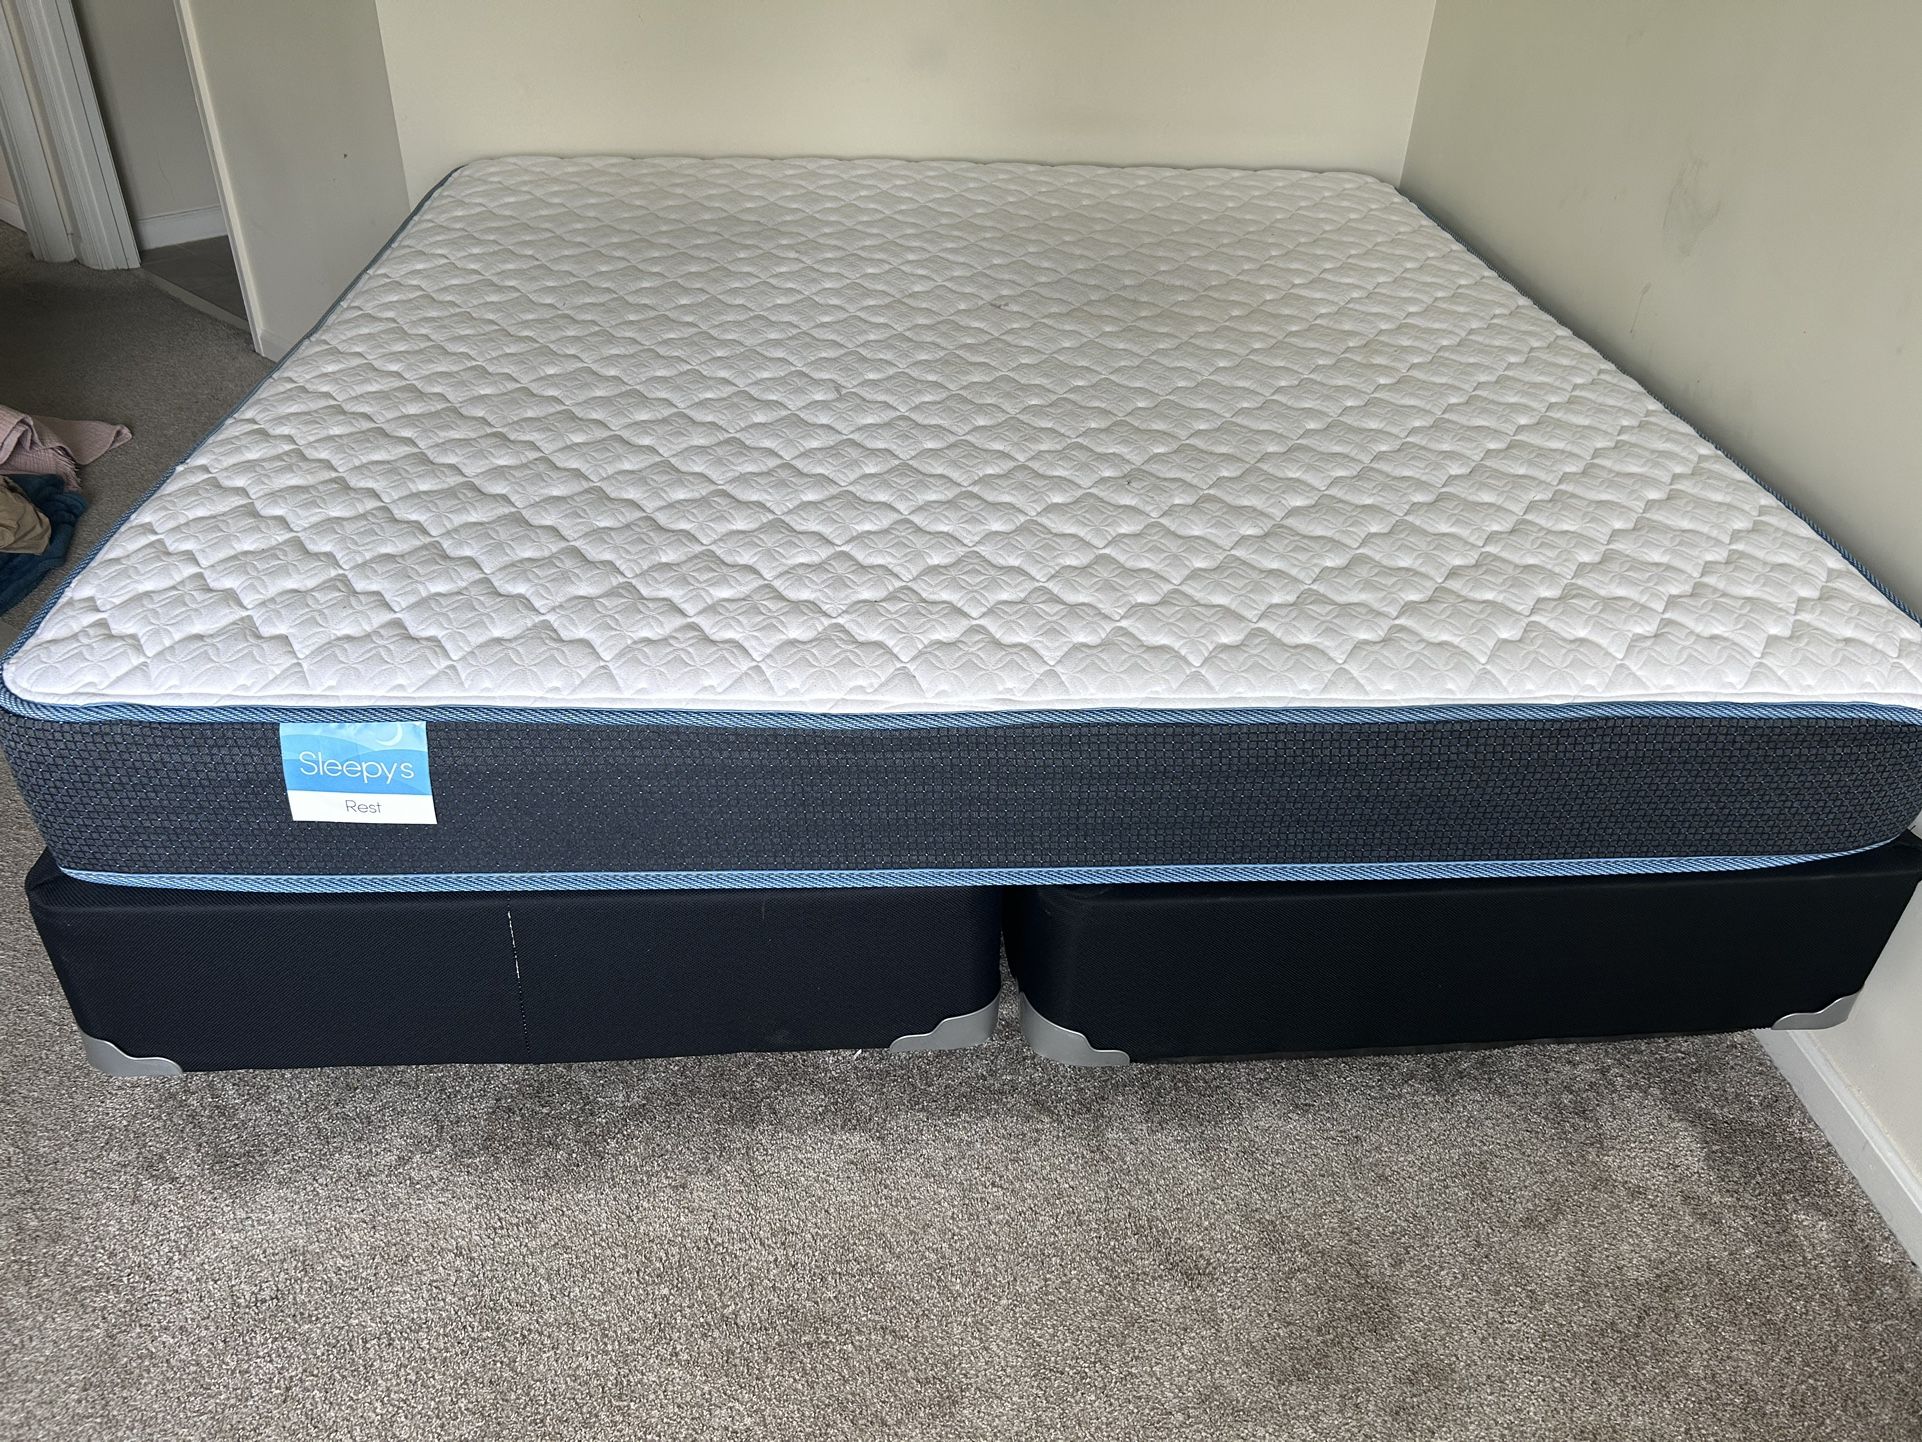 Bed - Mattress Included